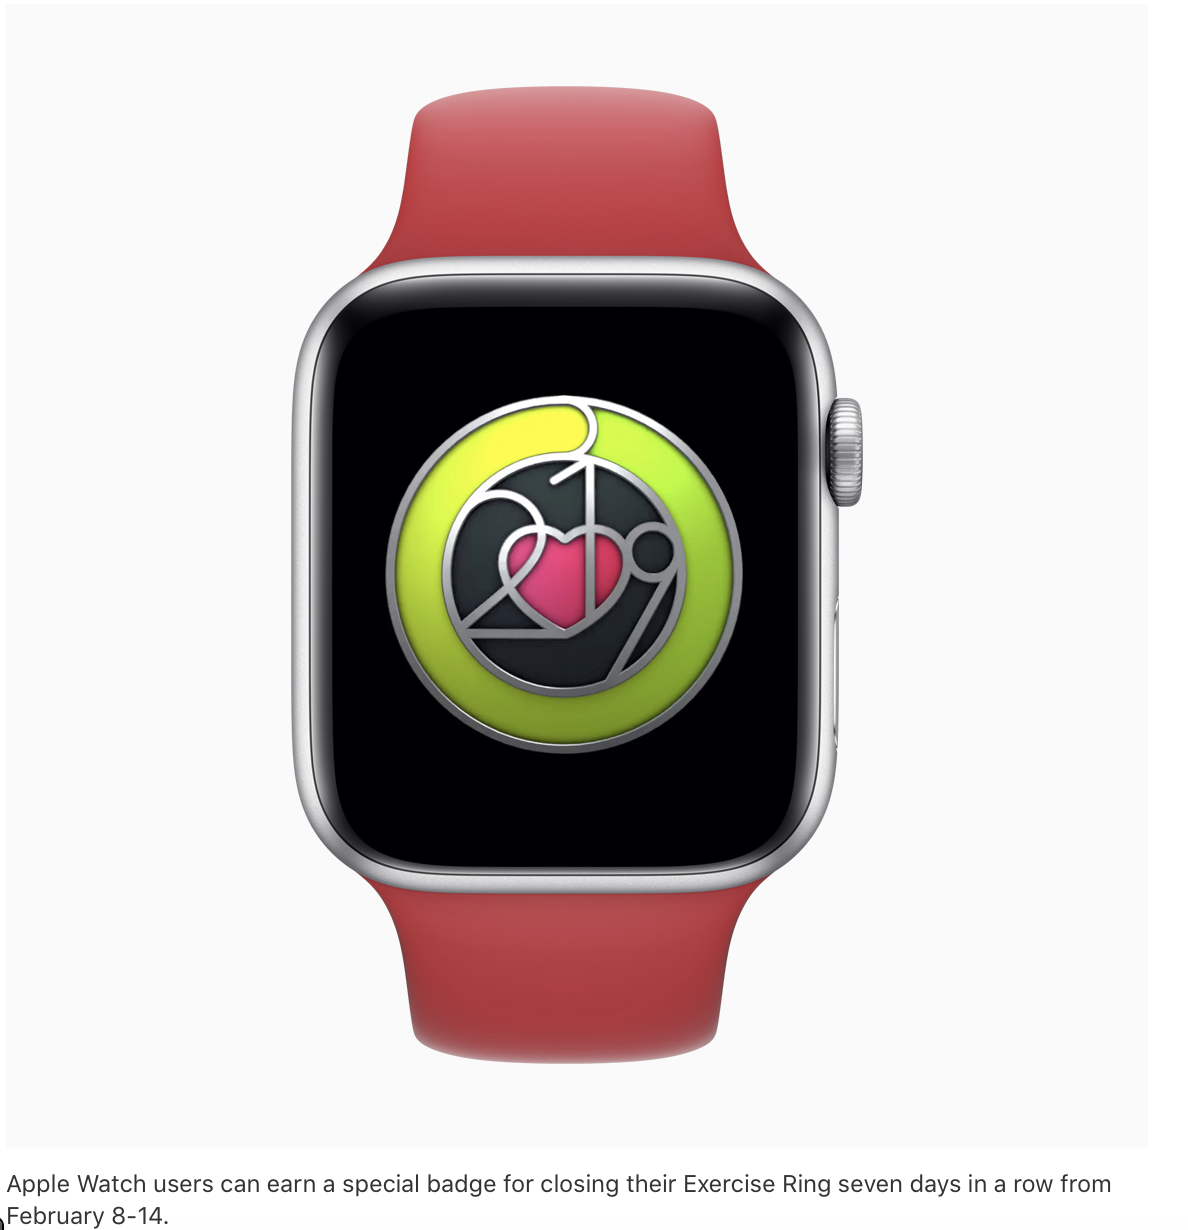 Apple marks Heart Month in February